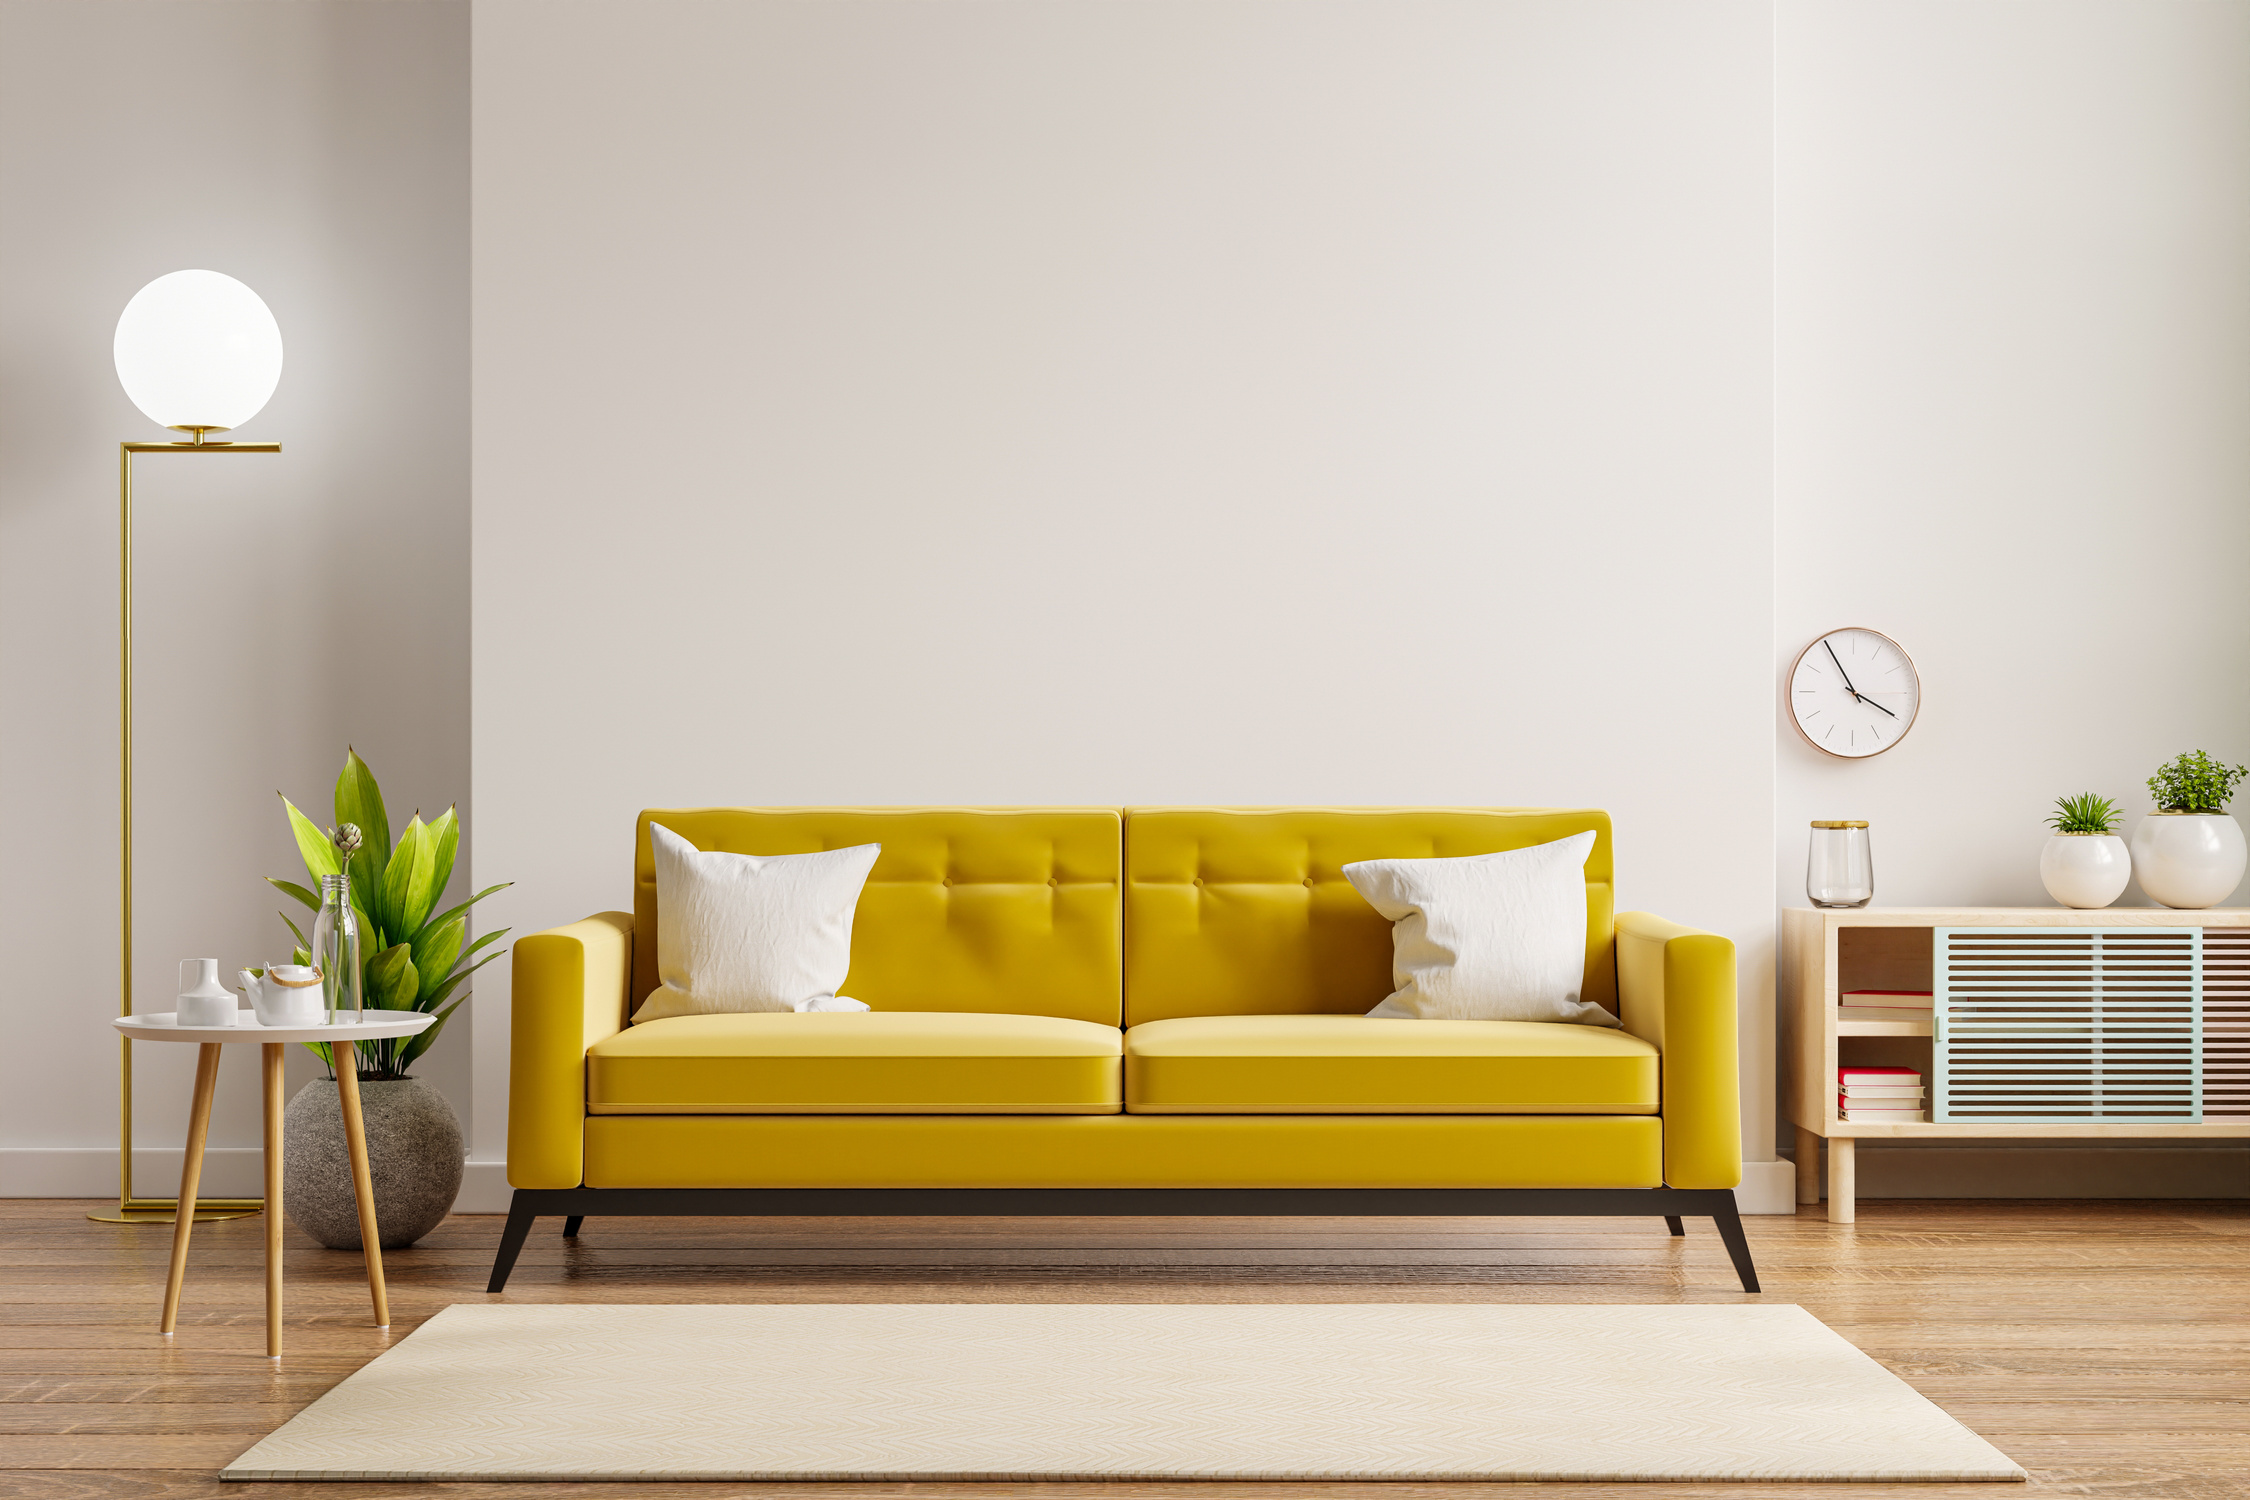 Yellow Sofa and Wooden Table in Living Room Interior